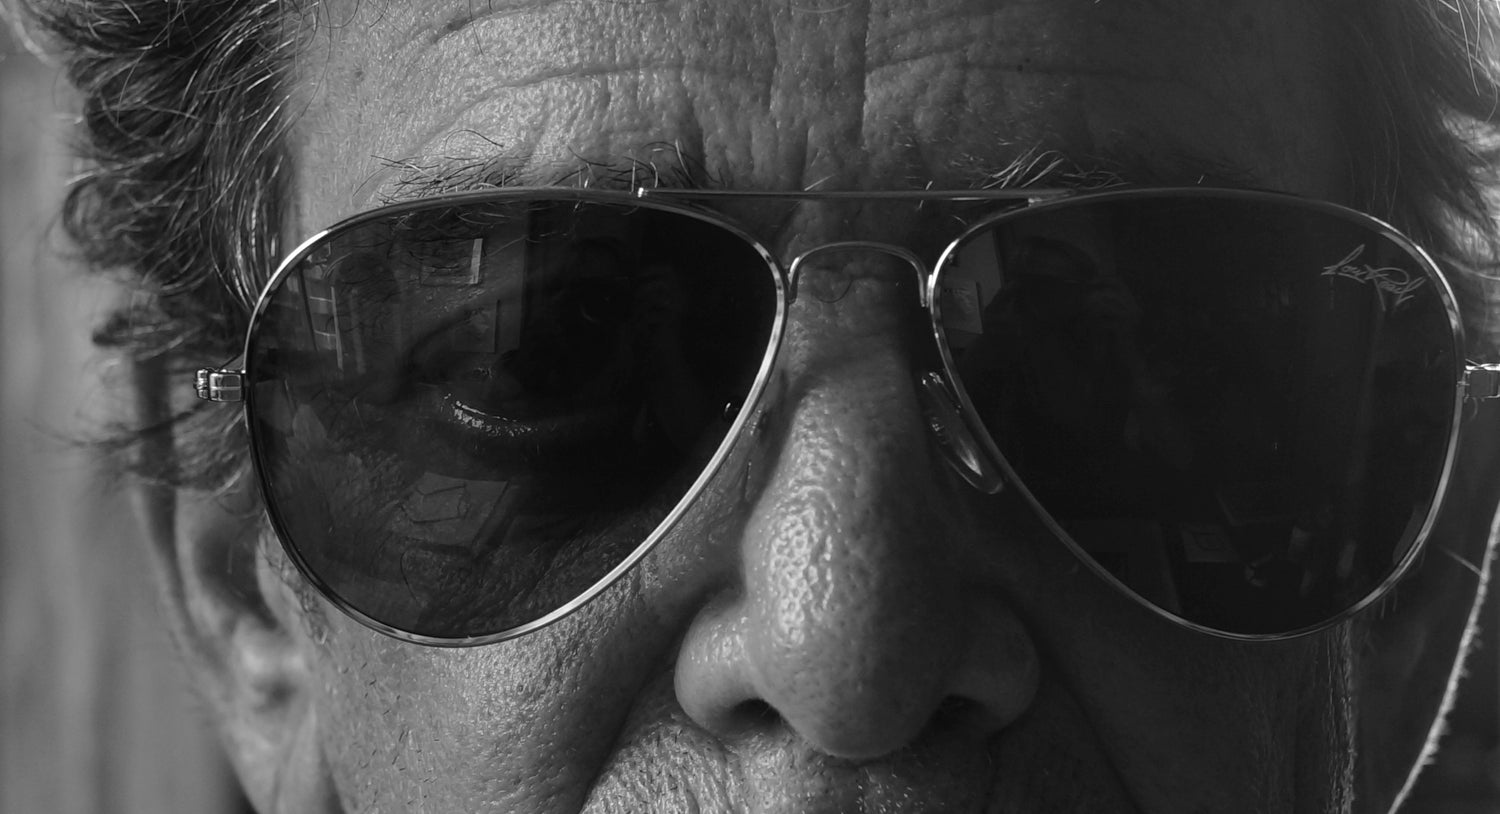 Lou Reed wearing collaboration sunglasses looking left